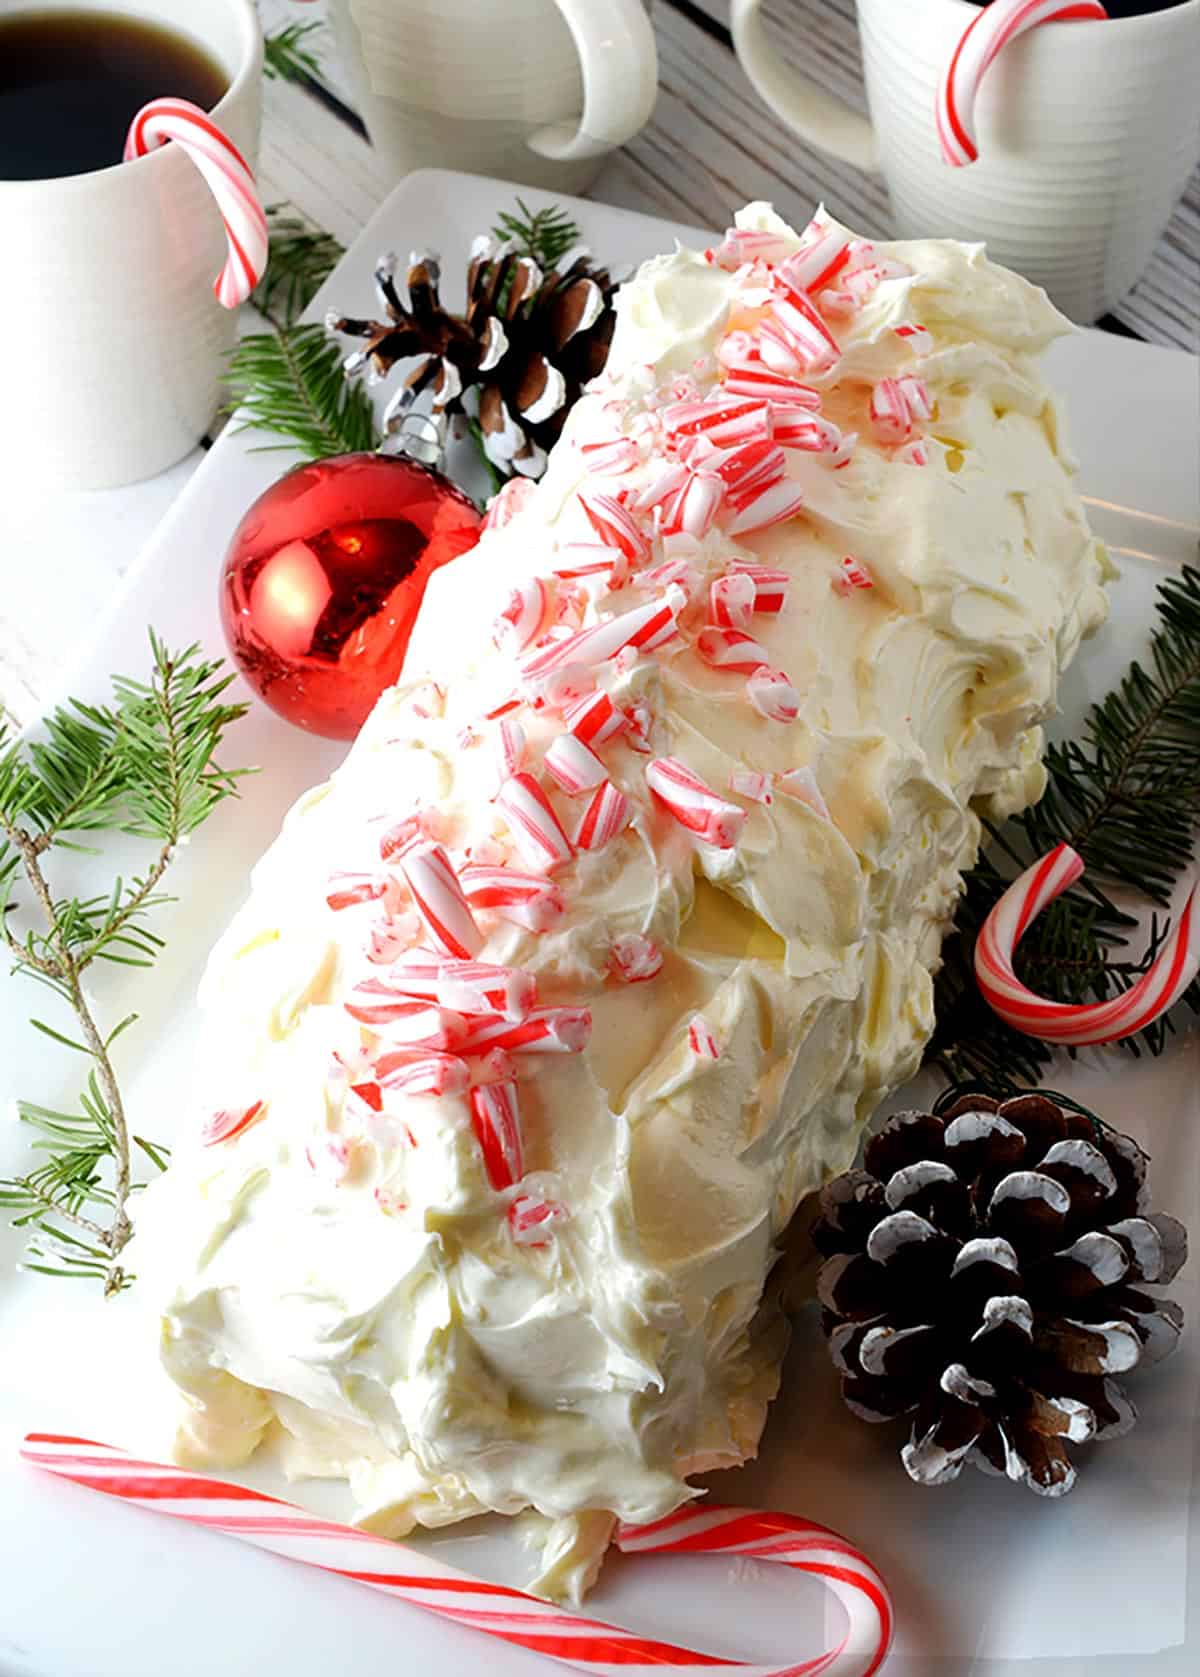 A festive log-shaped cake with white frosting and candy canes on top.